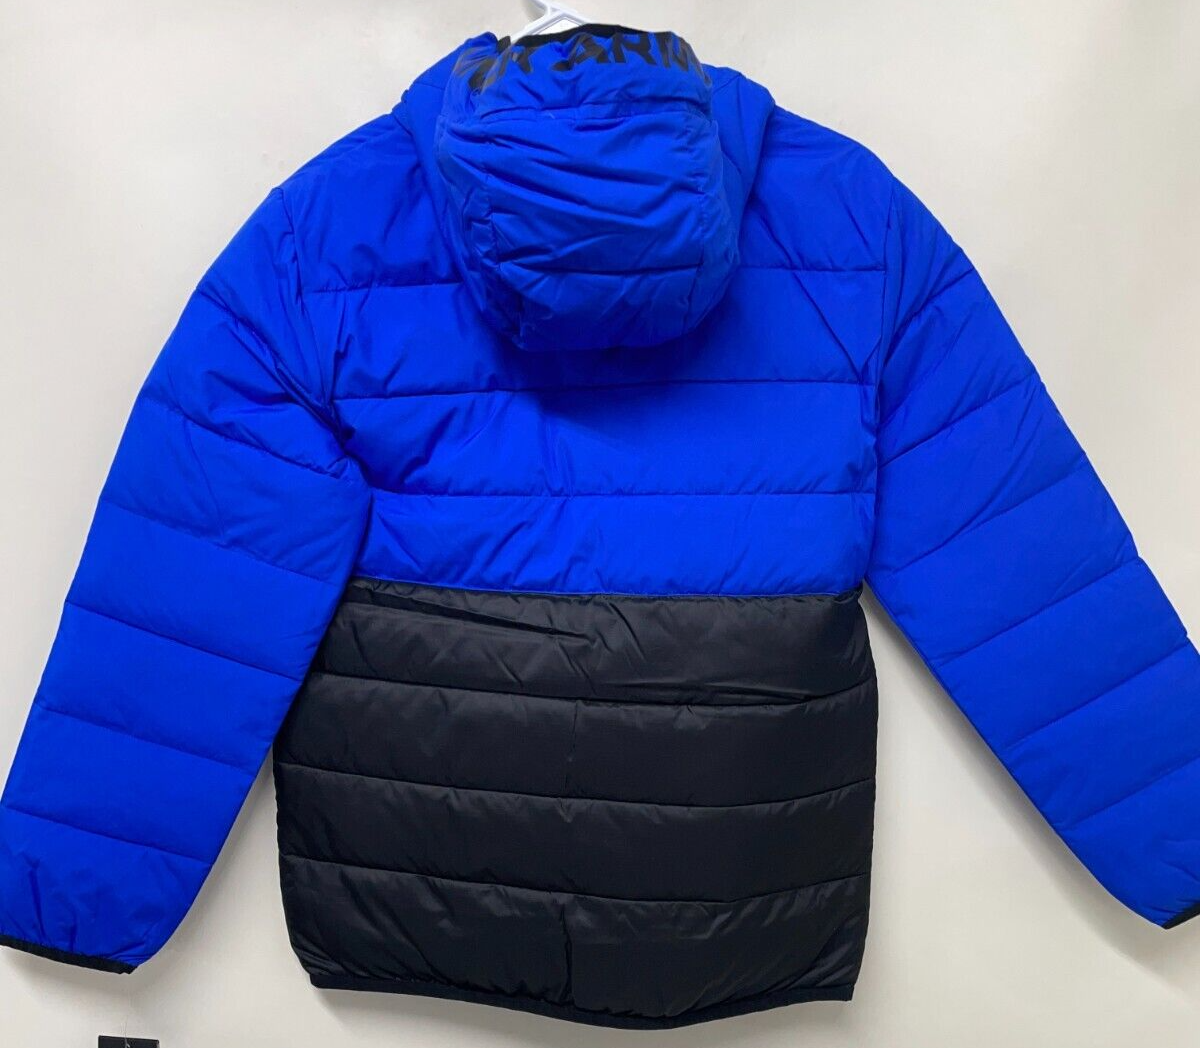 Under Armour Youth Boys L Pronto Colorblock Puffer Jacket Royal Blue 5119909